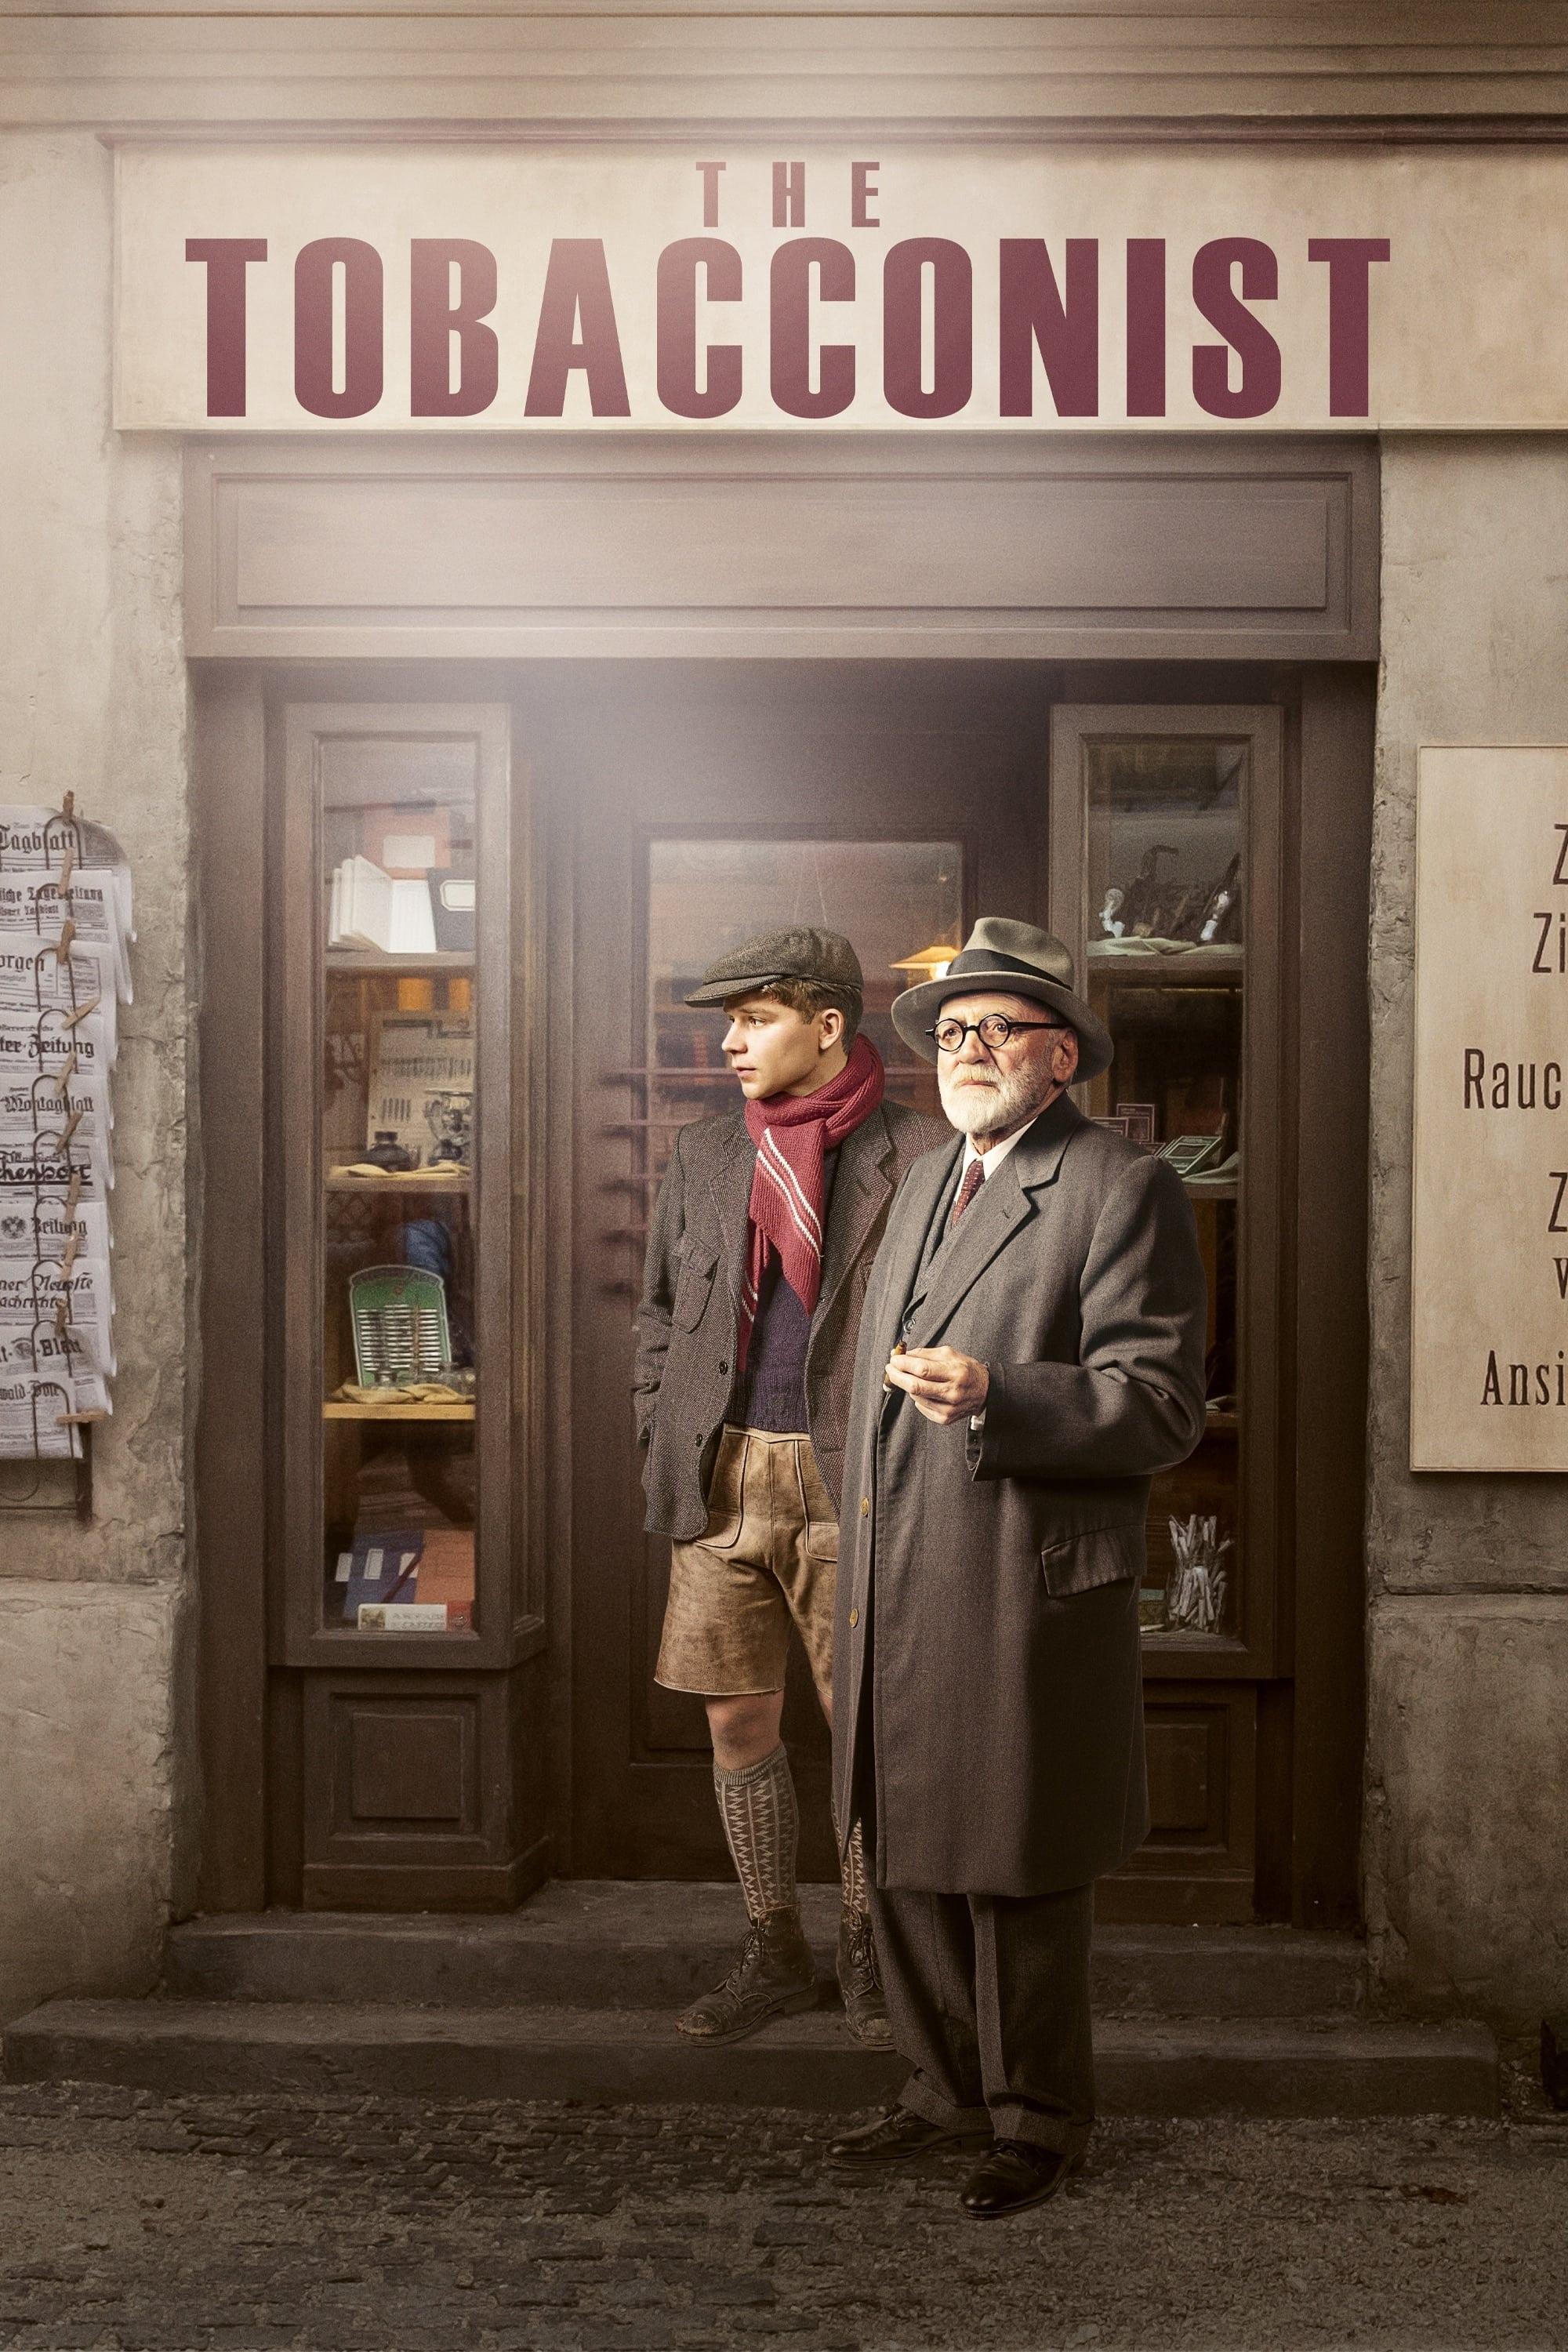 The Tobacconist poster